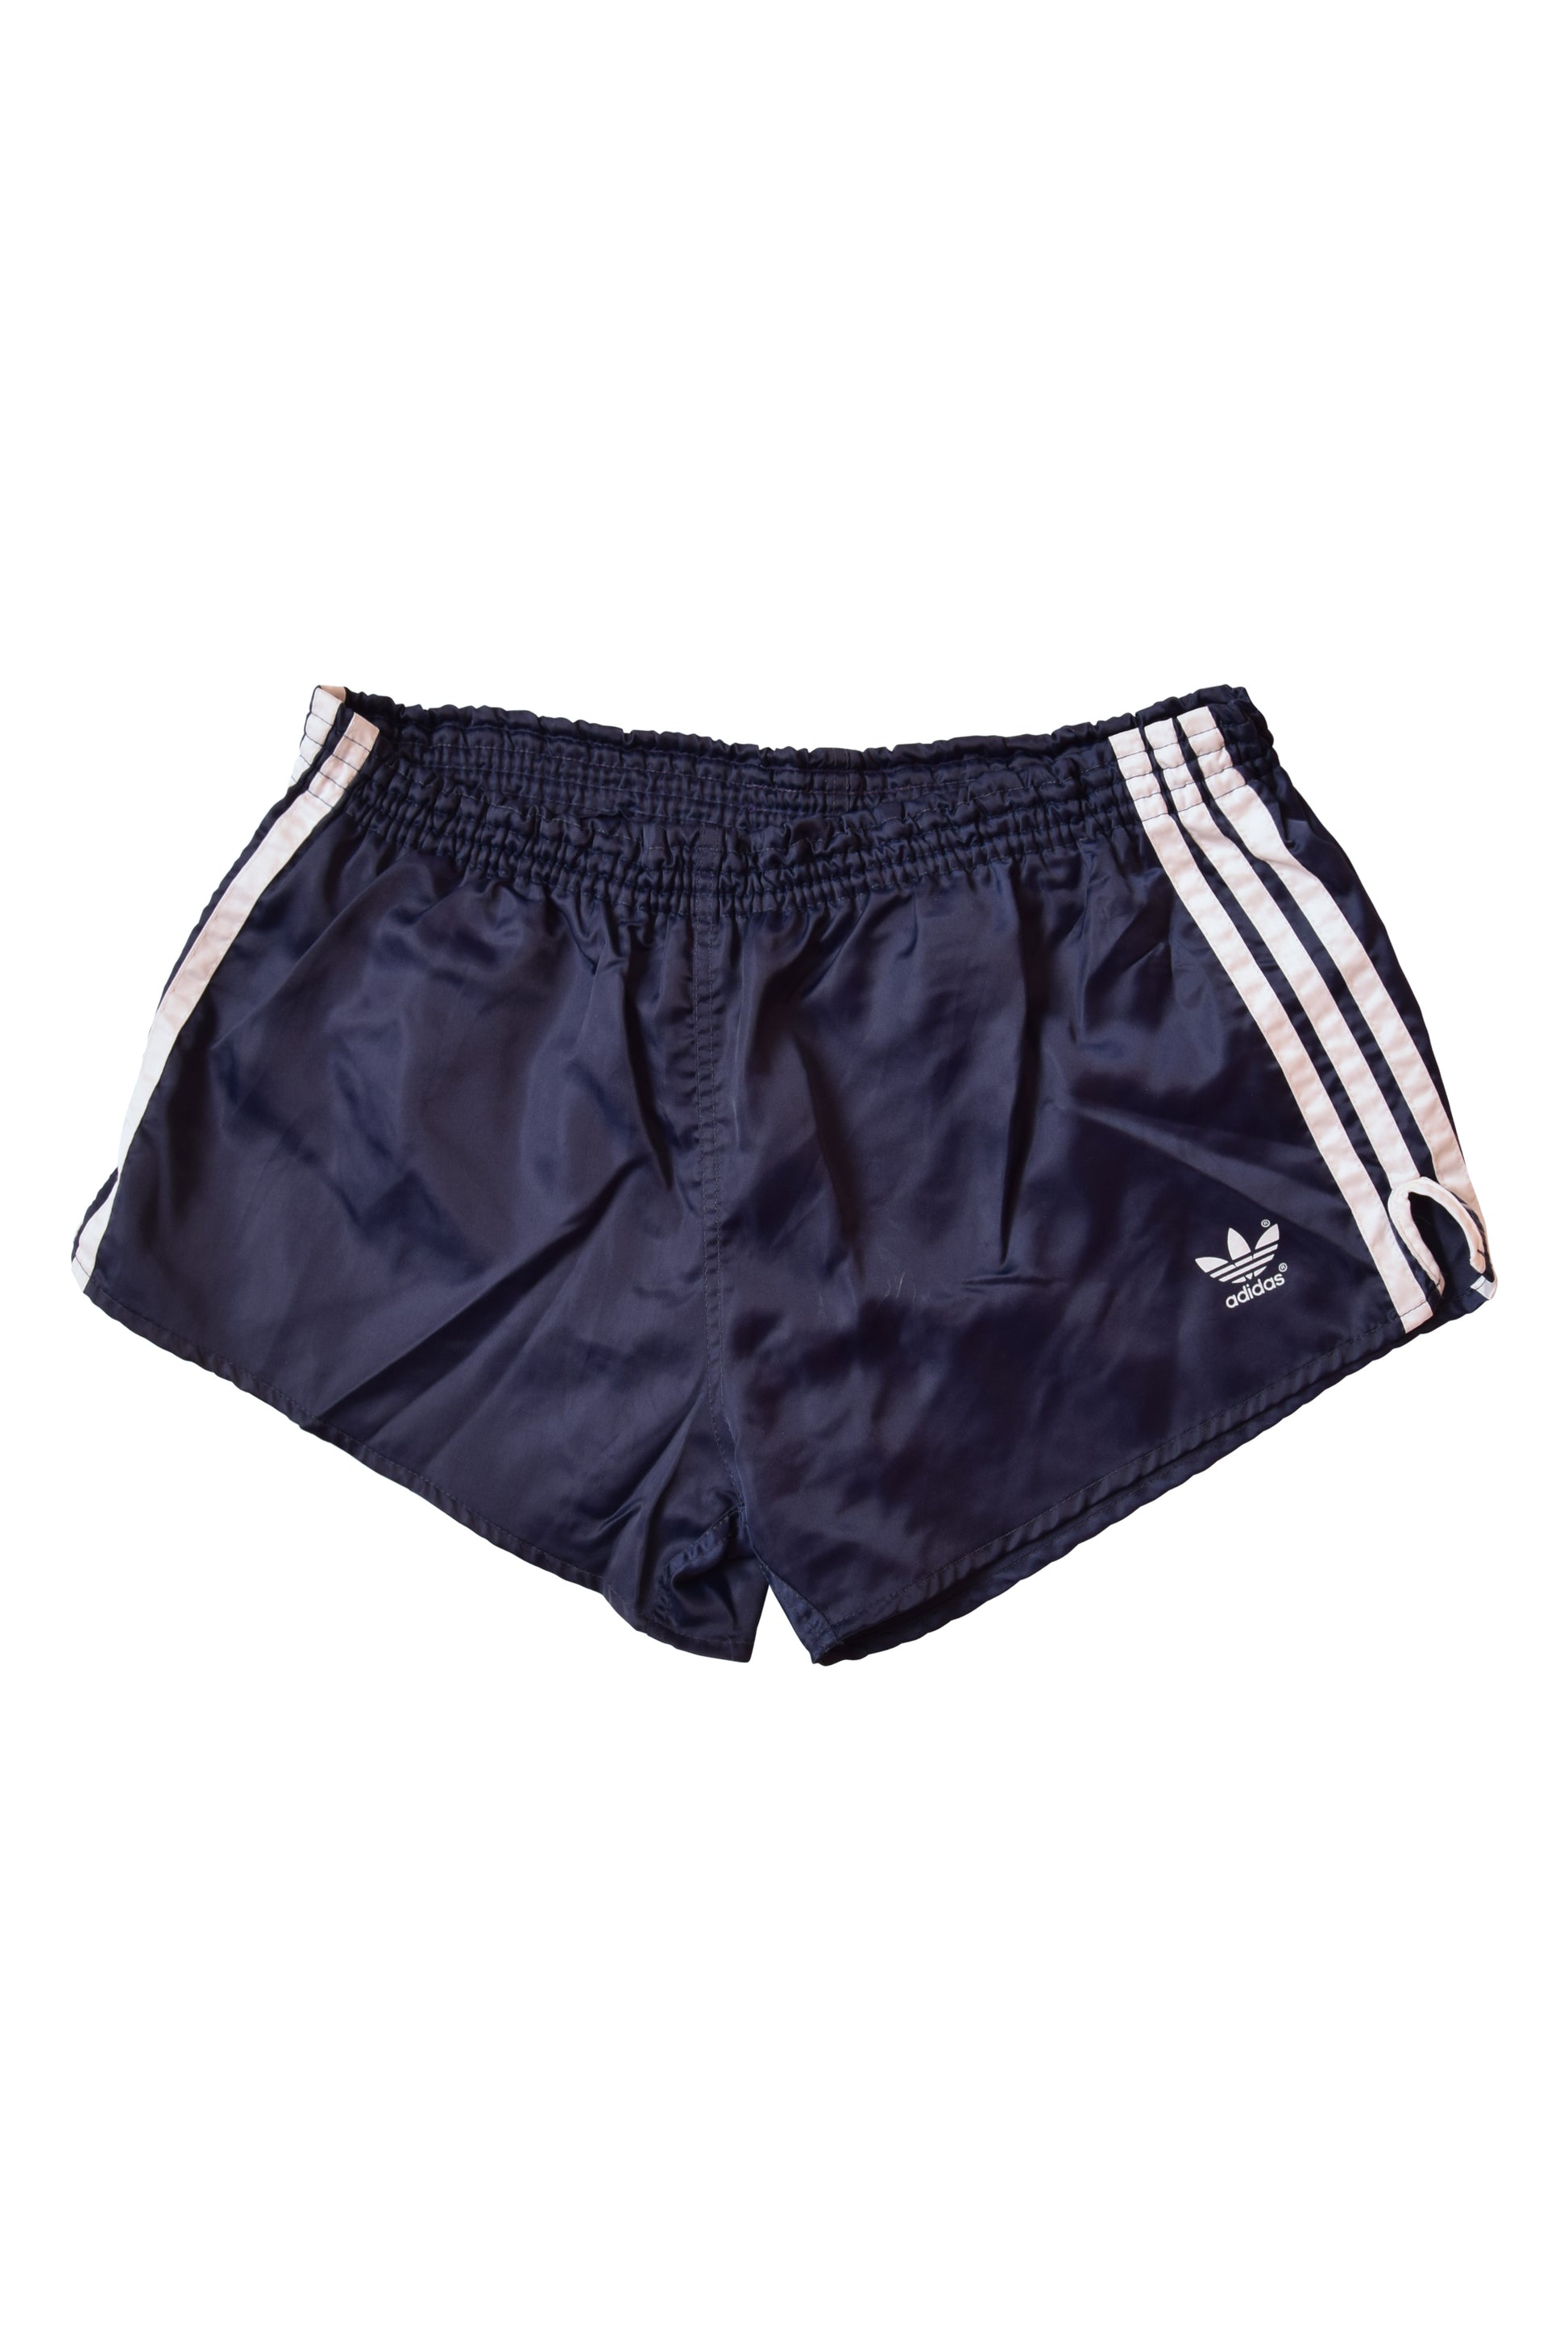 Vintage Adidas 80's Festival / Football Shorts Made in West Germany